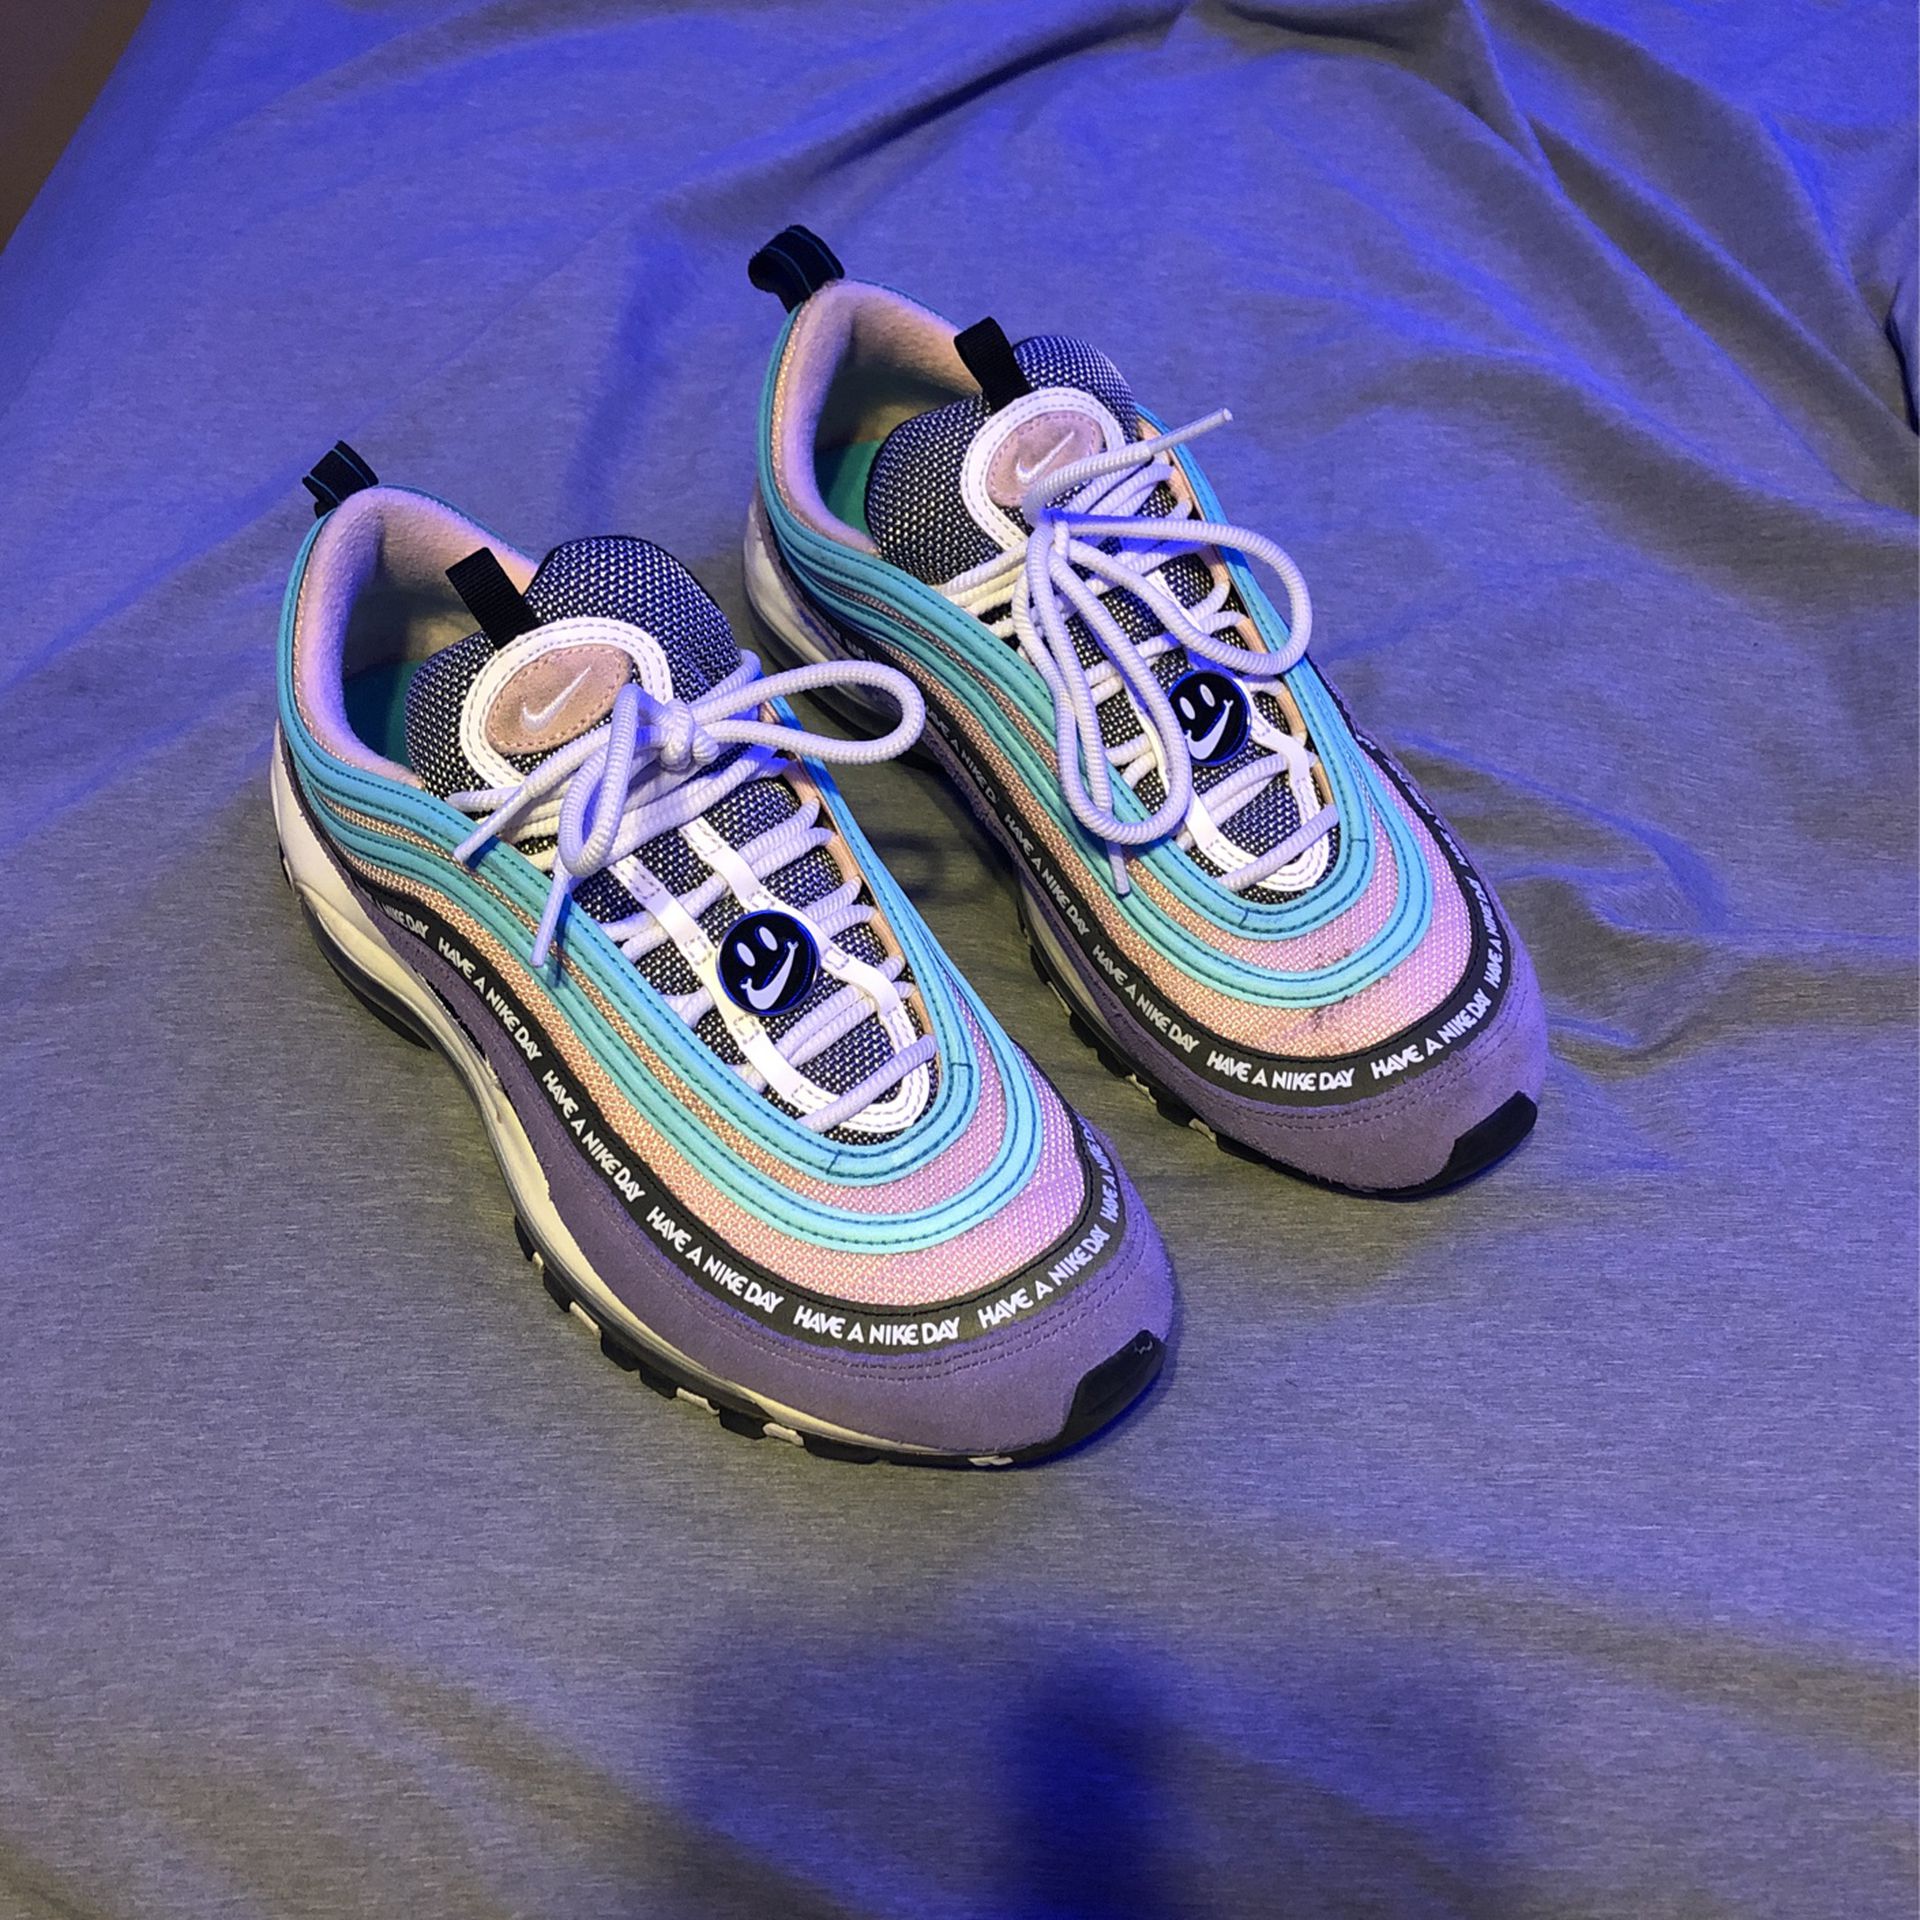 Nike Air Max 97 Have A Nike Day for Sale in Cave Creek, AZ - OfferUp